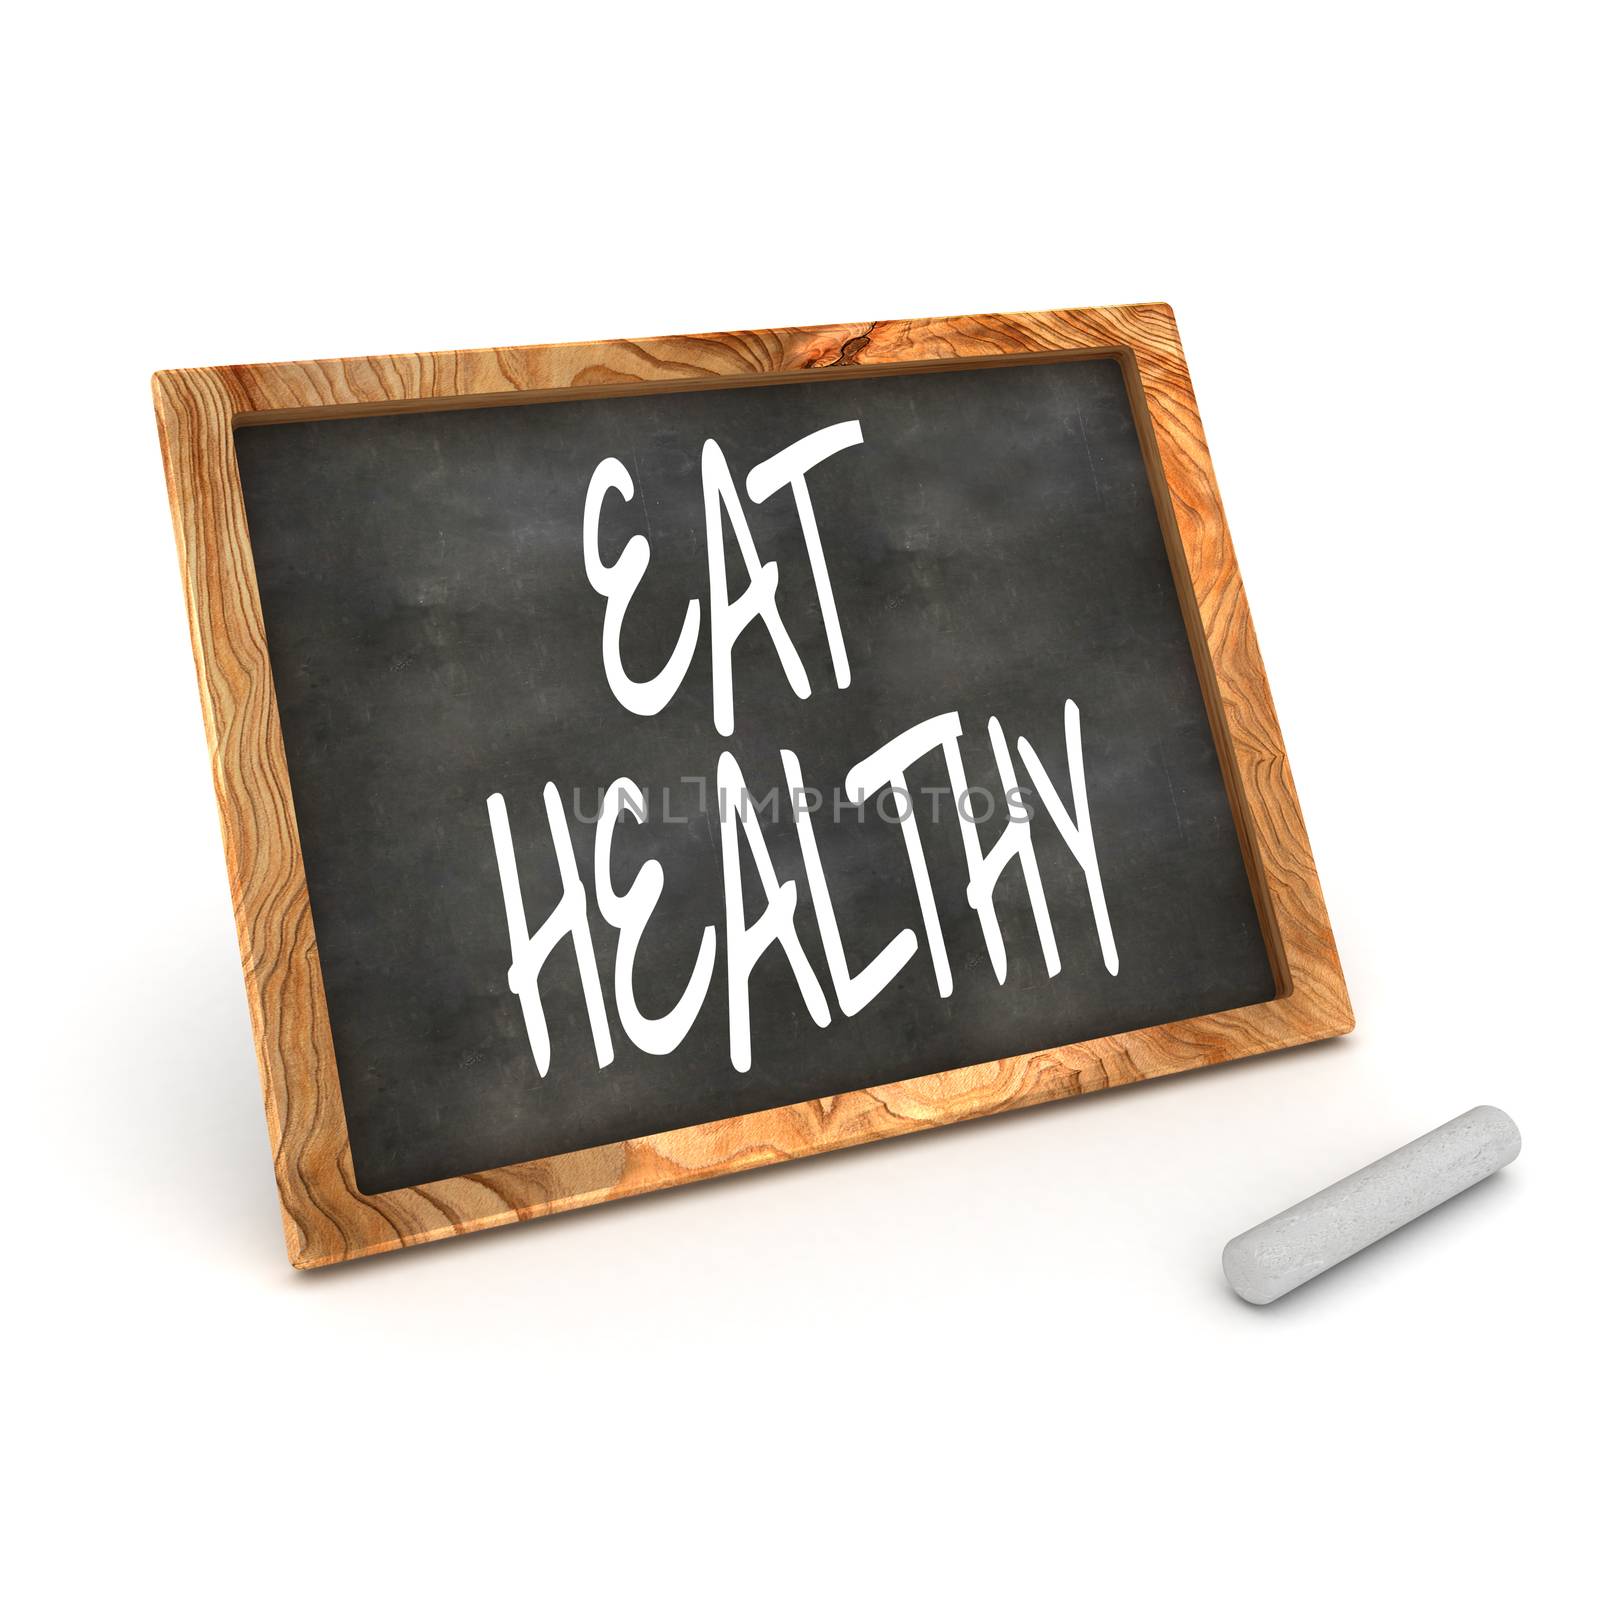 A Colourful 3d Rendered Illustration of a Blackboard Showing Eat Healthy